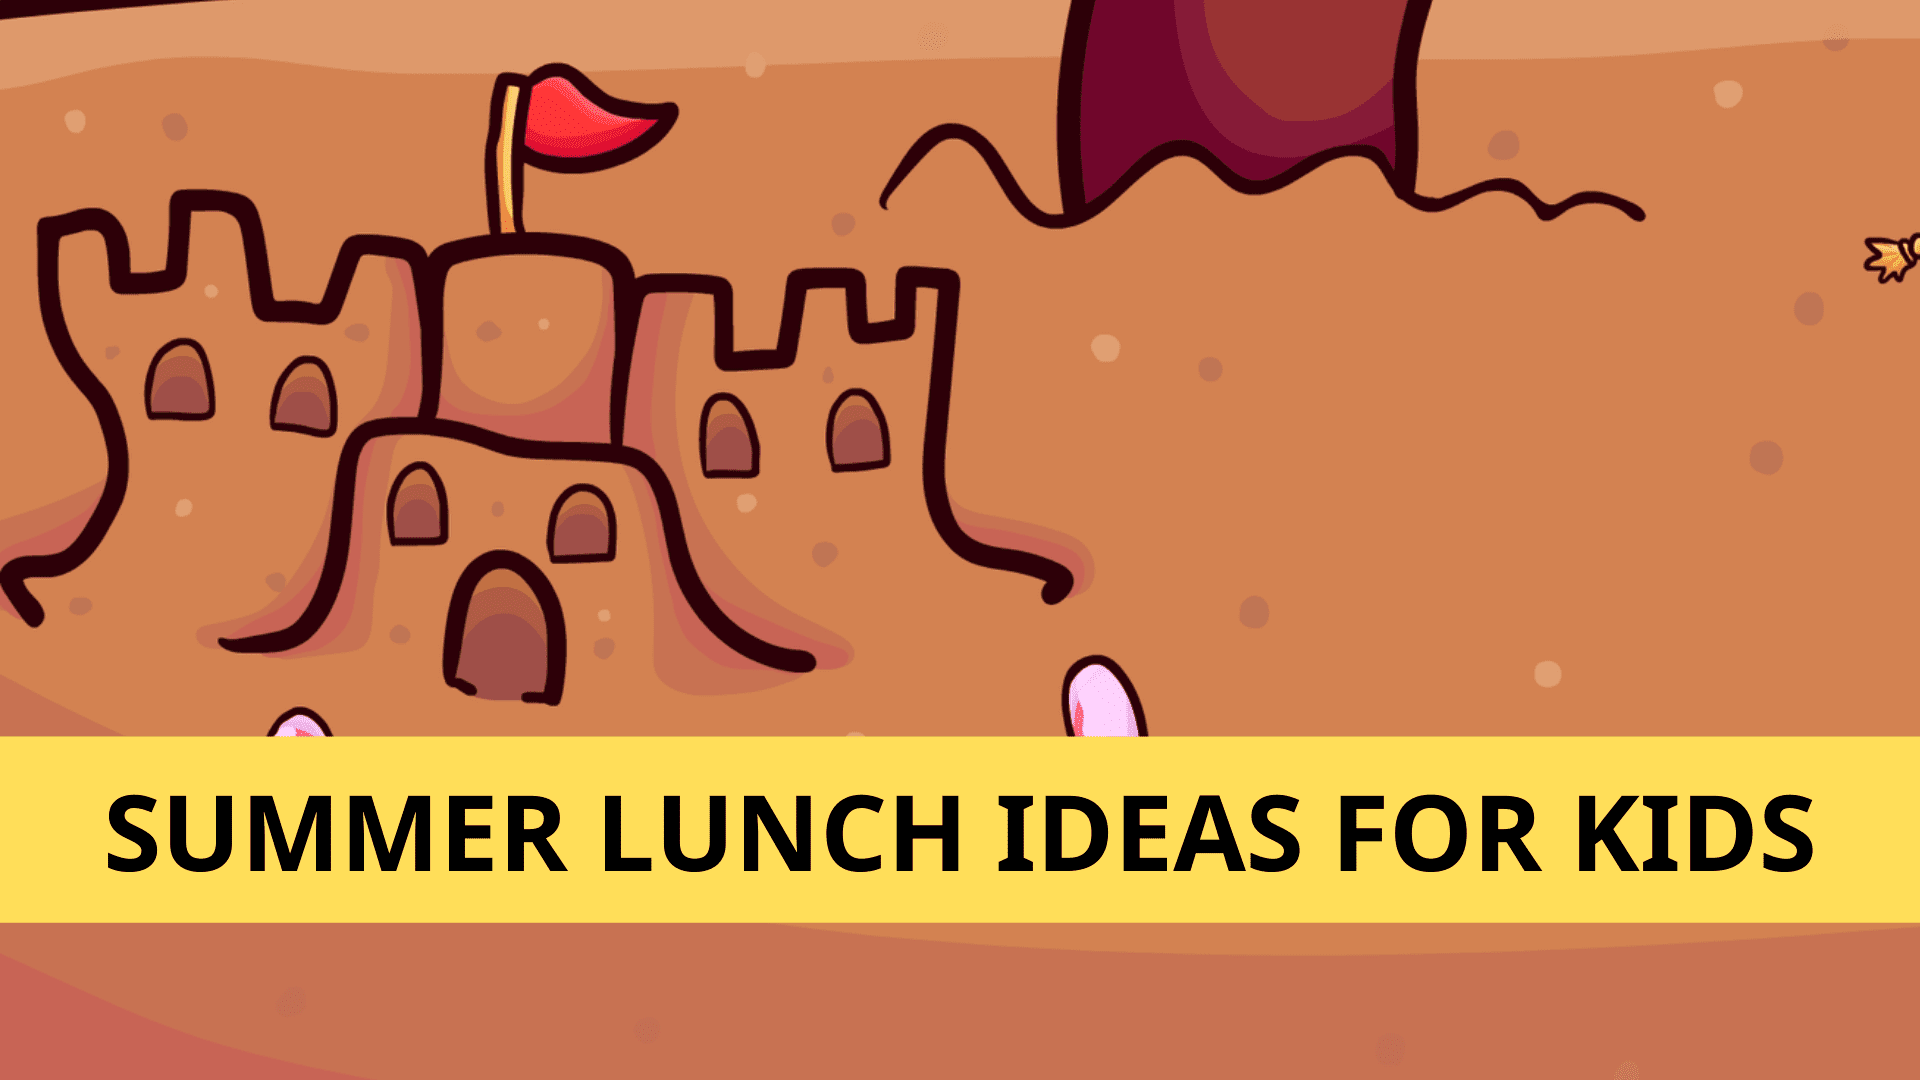 A sand castle on the beach with the text "Summer Lunch Ideas for Kids"